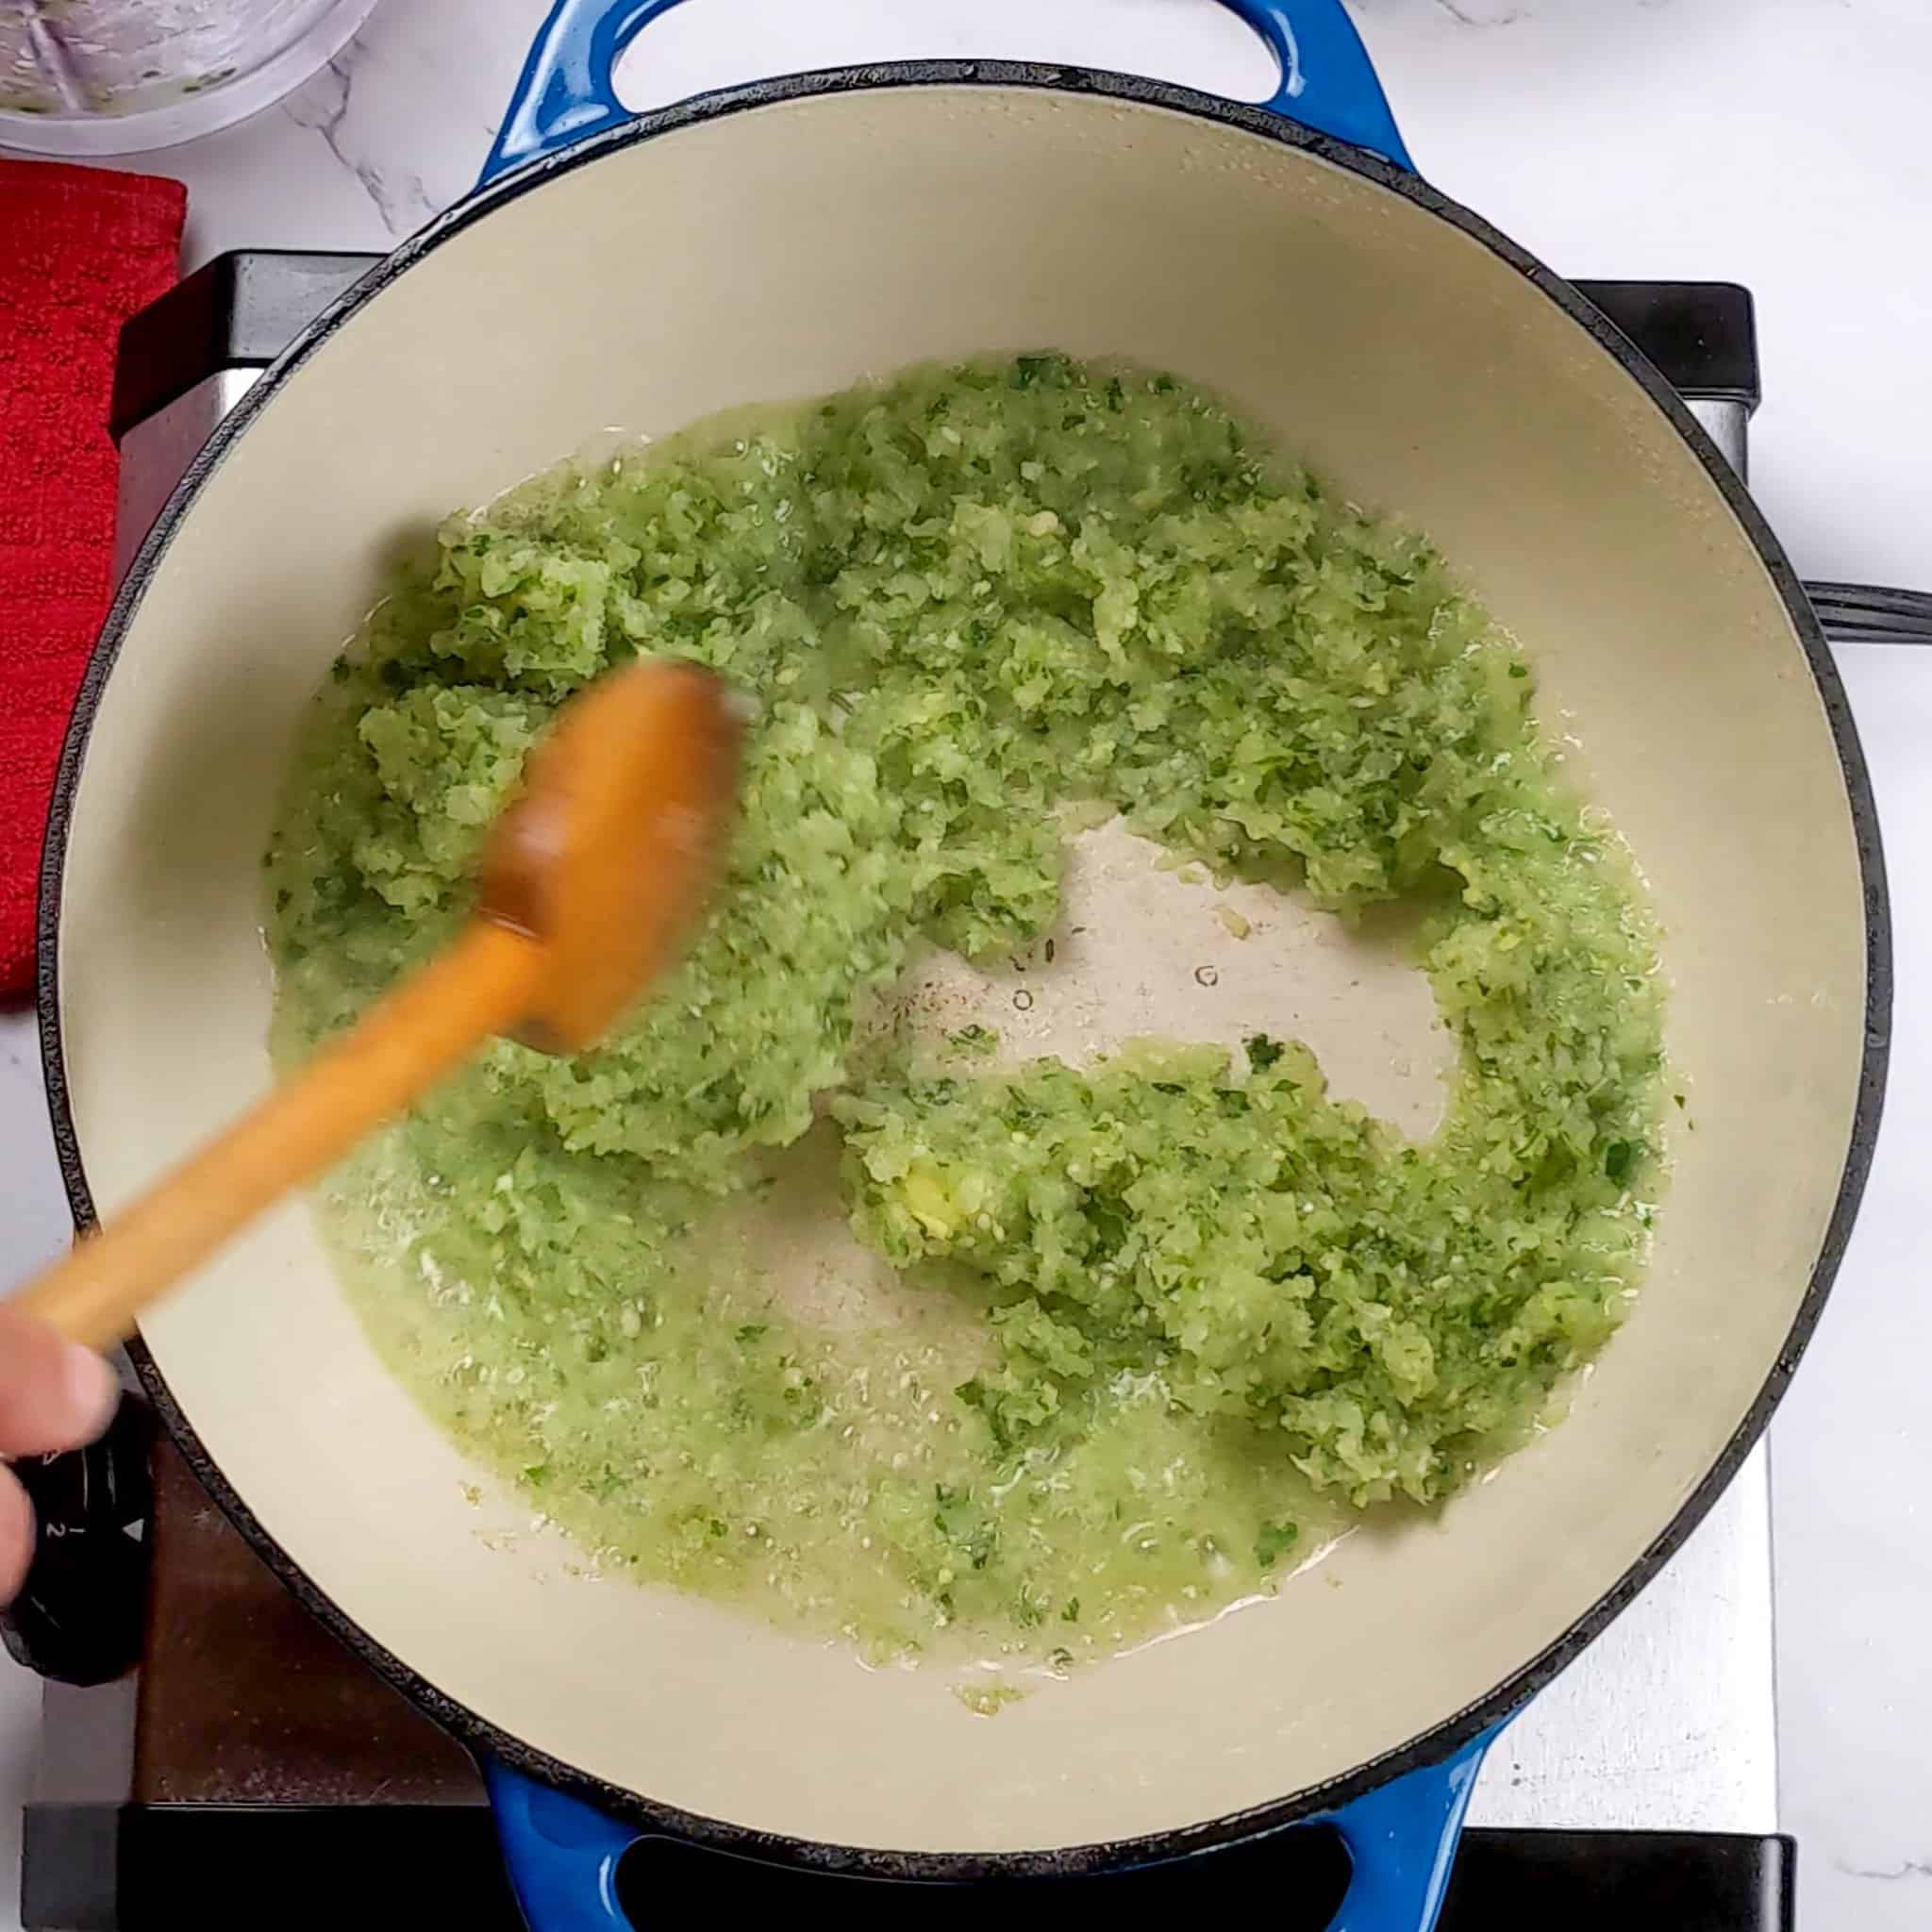 aromatic paste of garlic, ginger, onions, jalapeno and cilantro cooking down in a Lodge enameled dutch oven being stirred with a wooden spoon